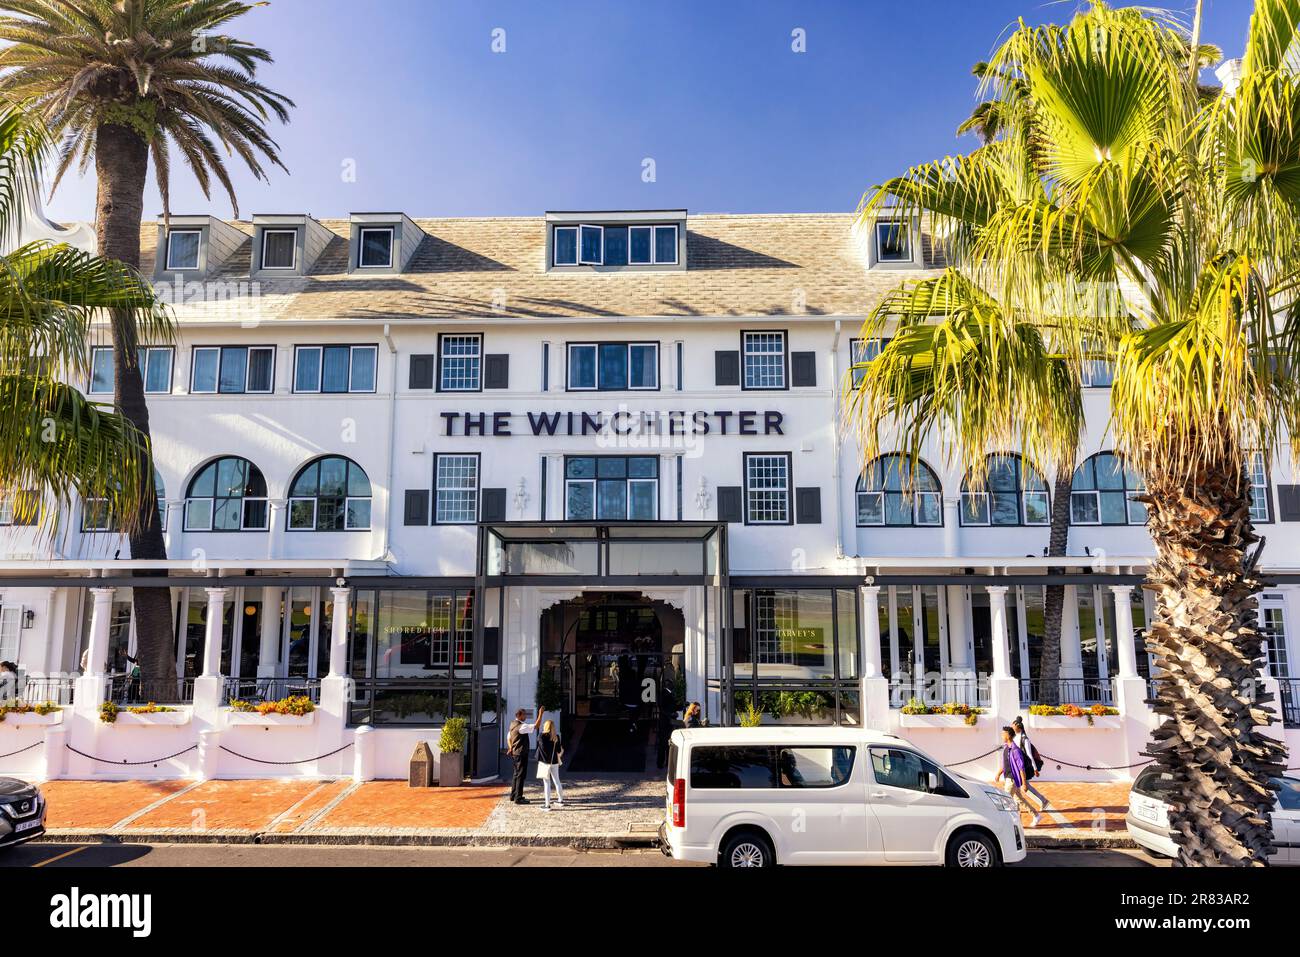 The Winchester Hotel located at the Sea Point Promenade - Cape Town, South Africa Stock Photo